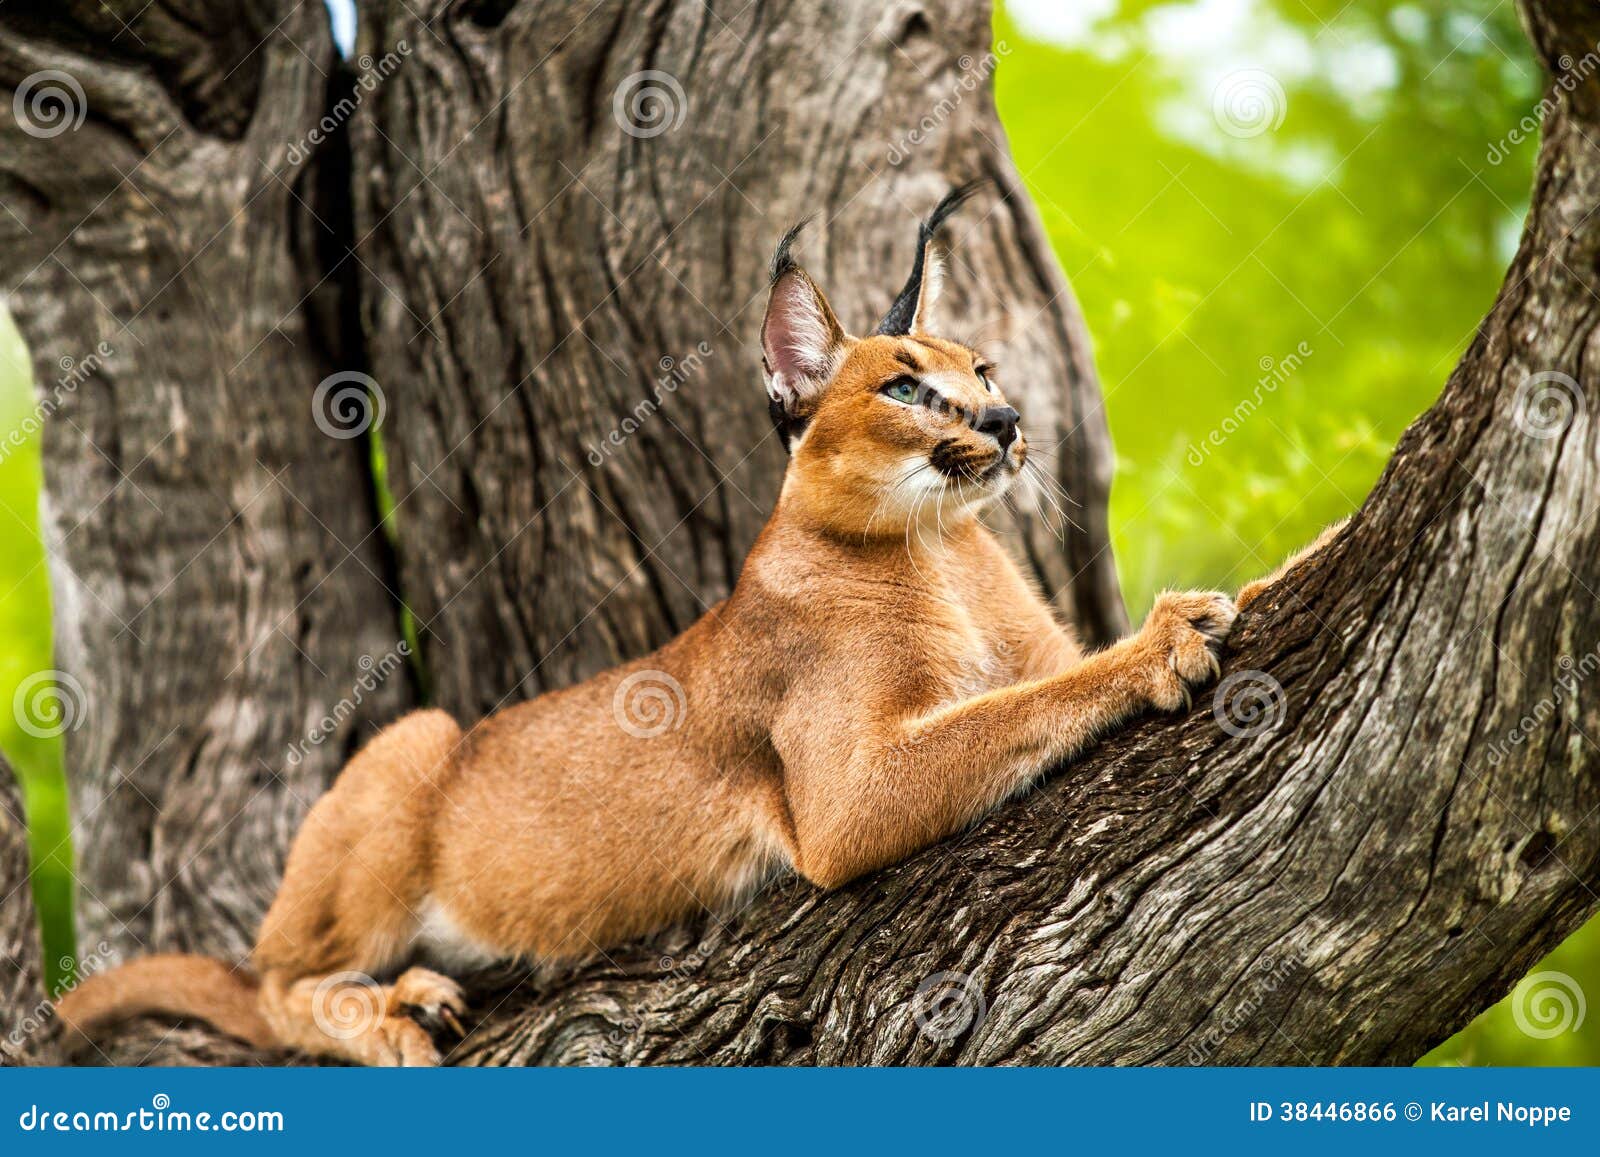 caracal in tree.